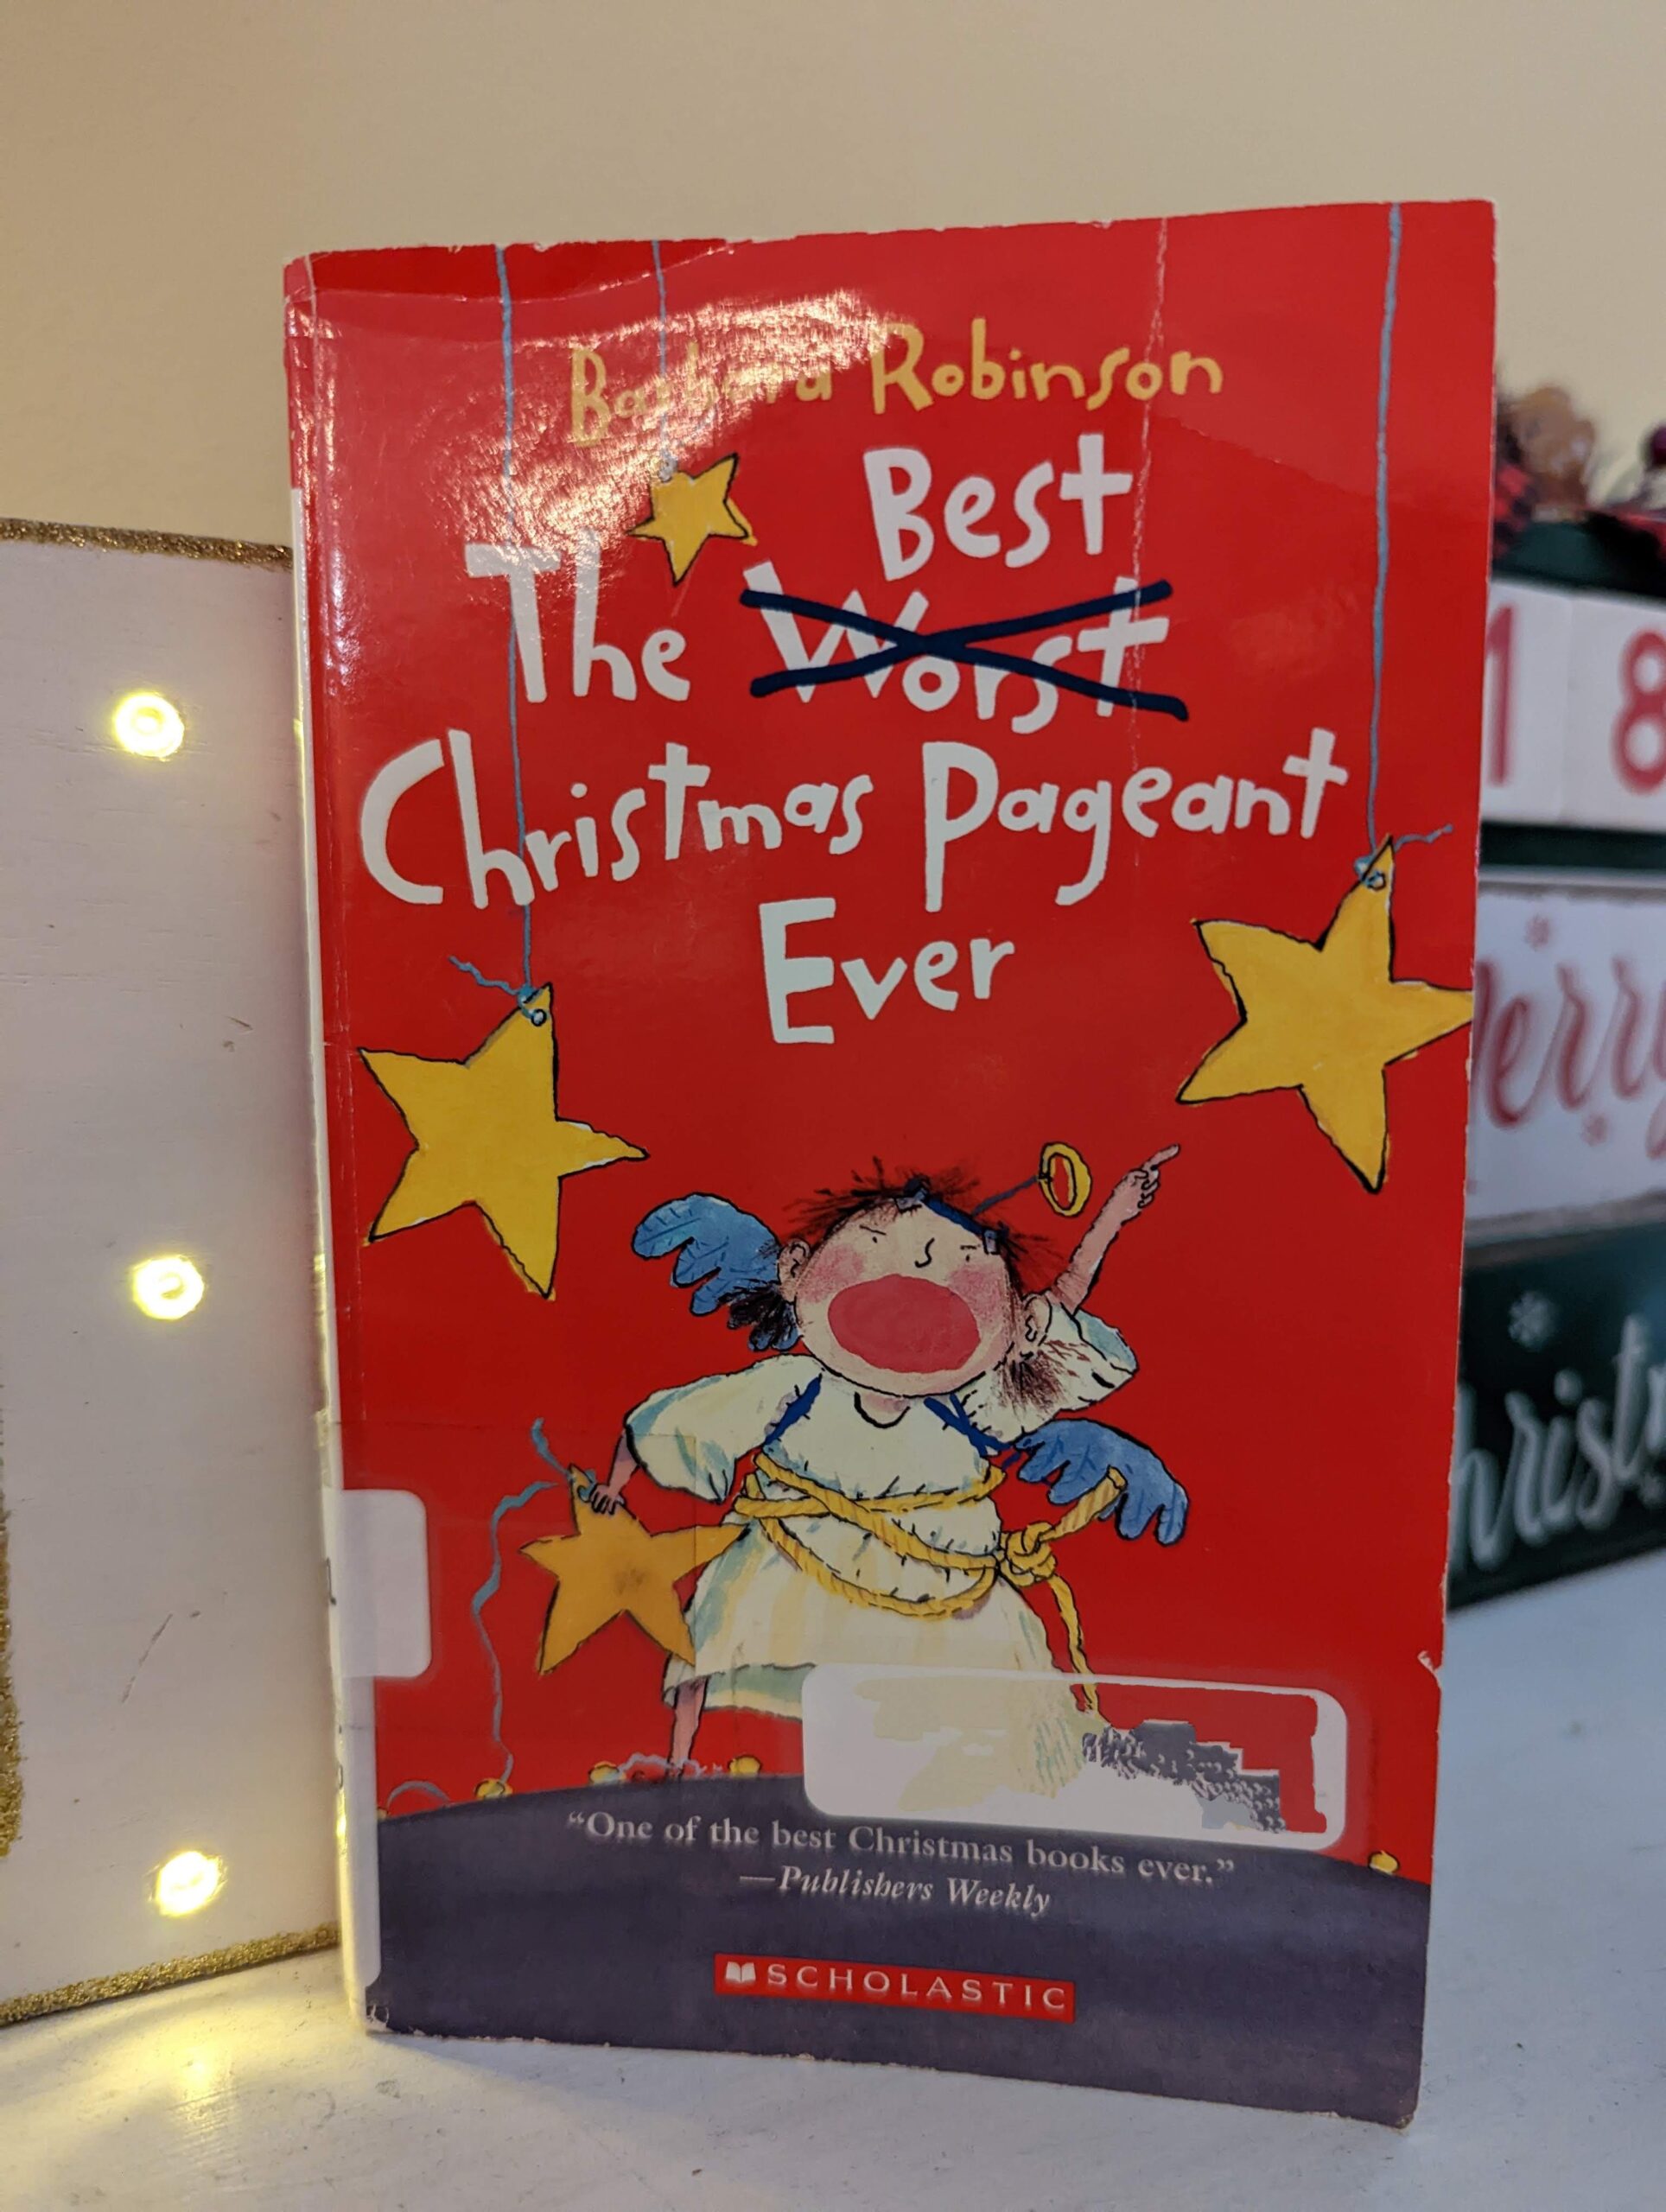 The Best Christmas Pageant Ever by Barabara Robinson